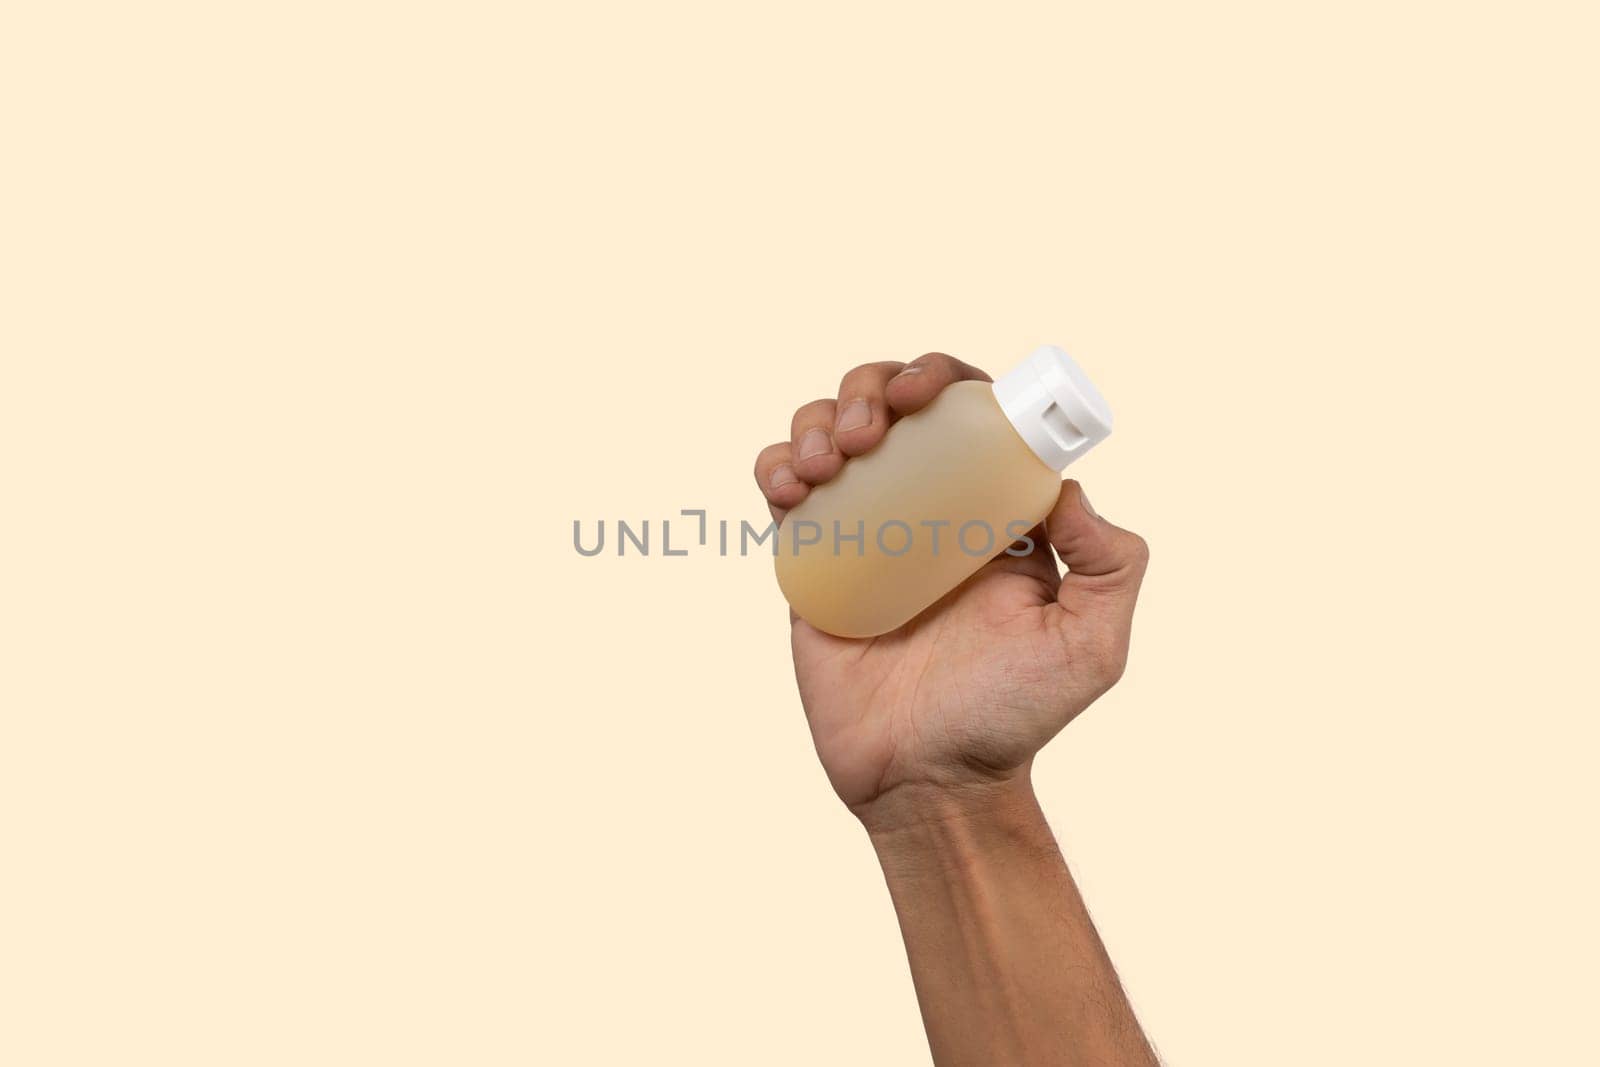 Black male hand holding shaampoo or gel container mockup on beige background. by TropicalNinjaStudio